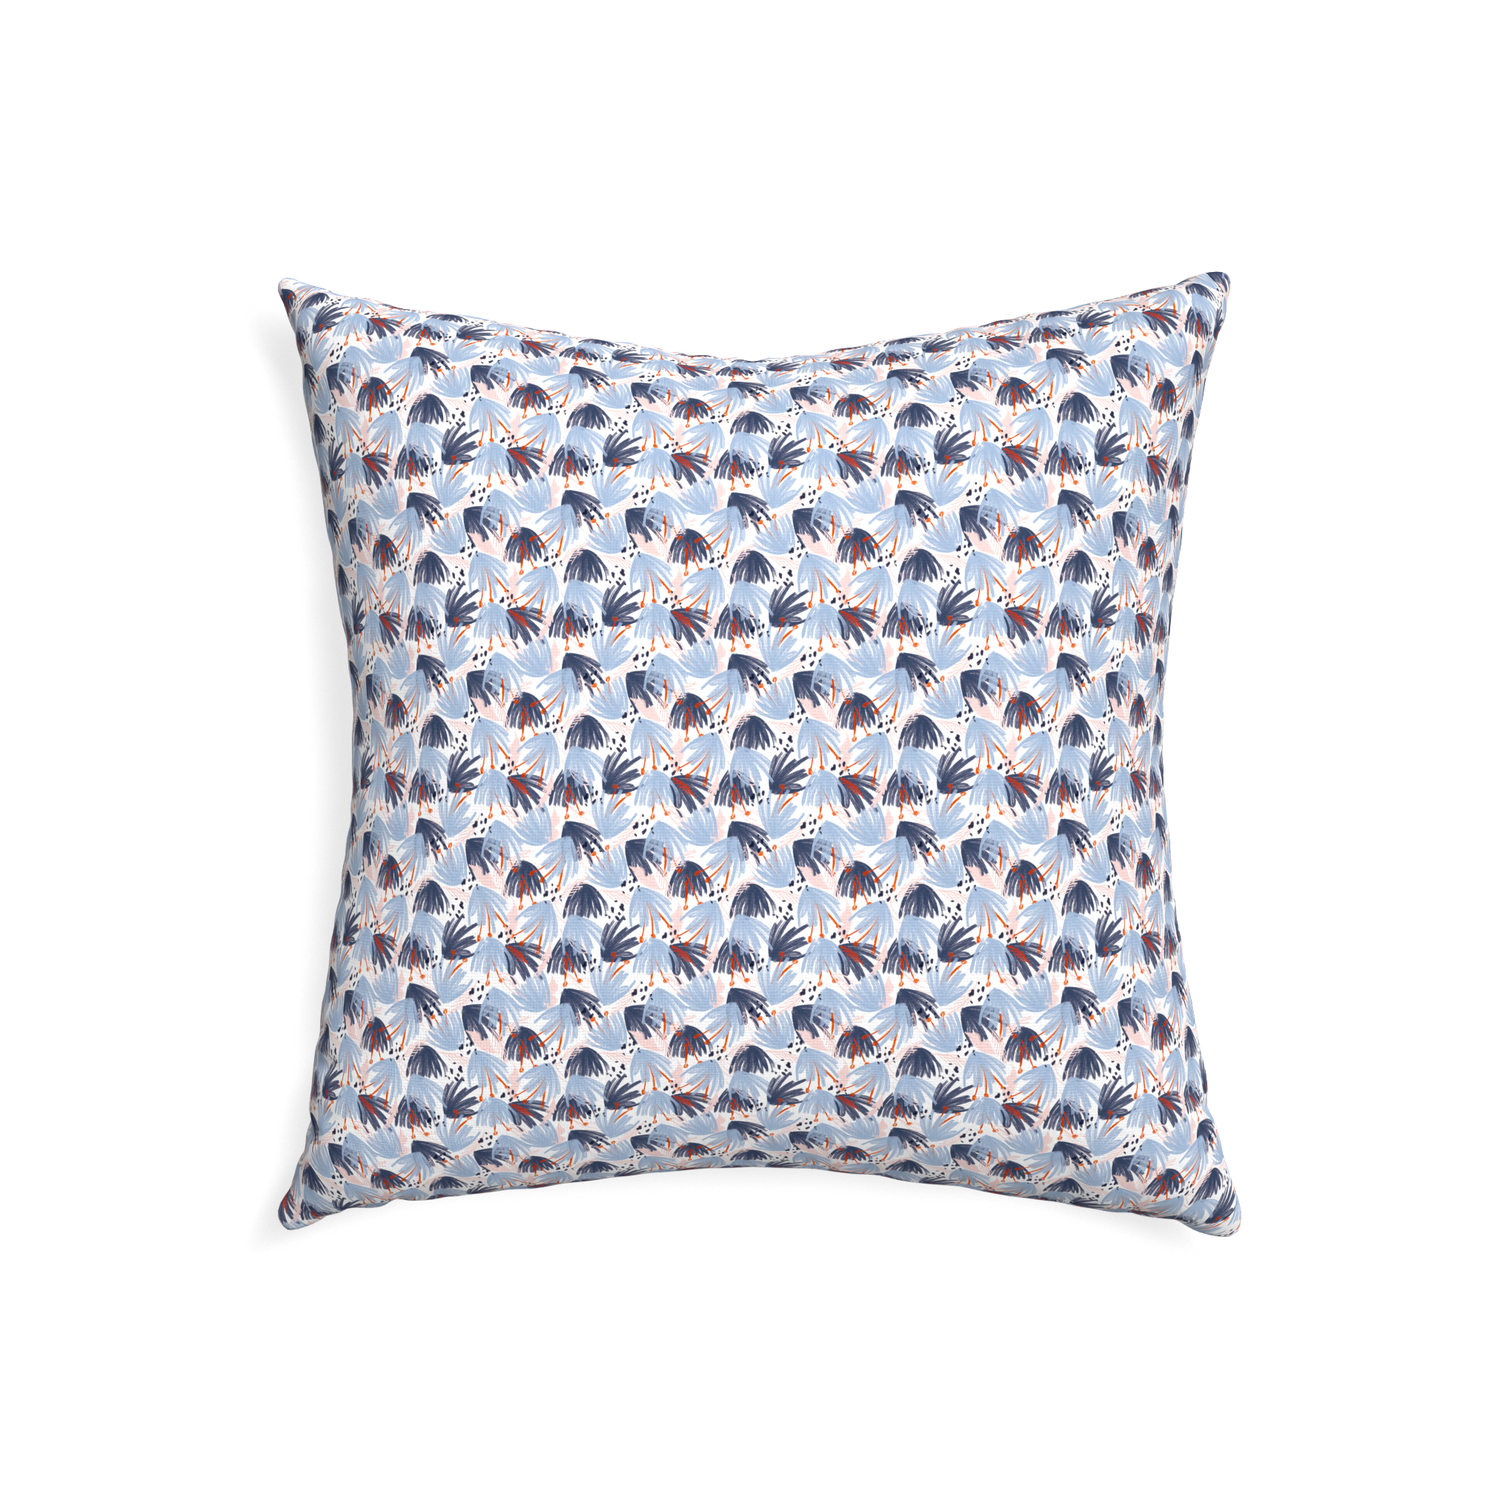 22-square eden blue custom pillow with none on white background